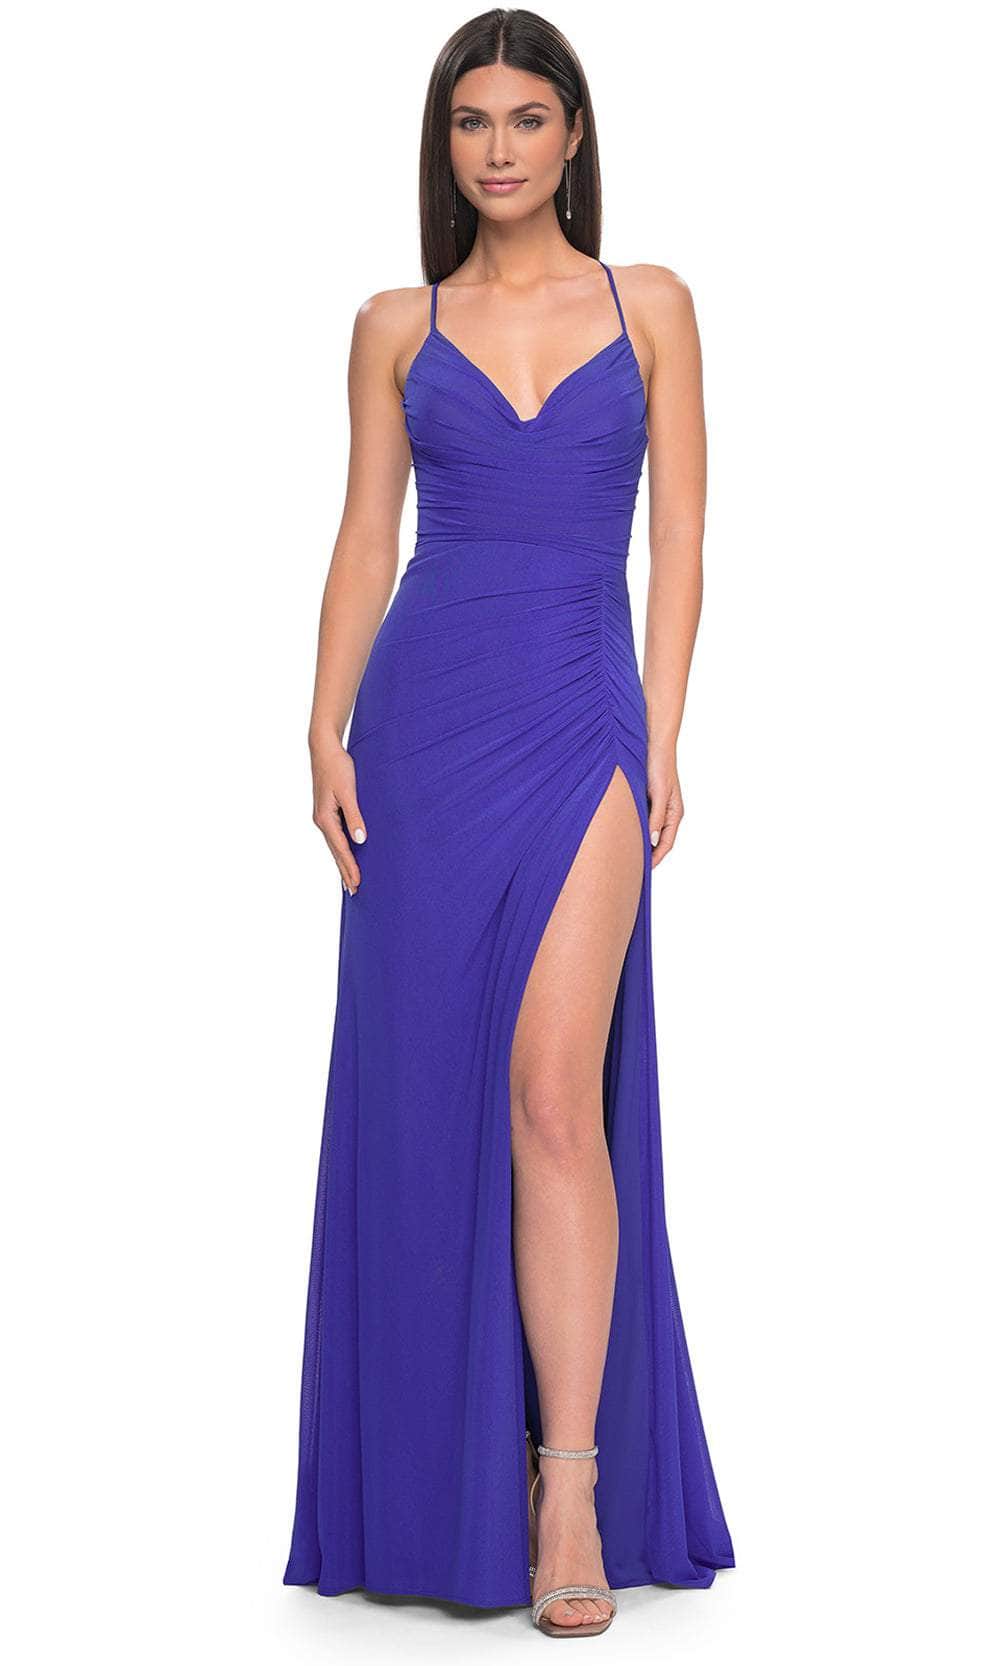 La Femme 31151 - Ruched Corset Prom Dress Special Occasion Dress 00 / Royal Blue